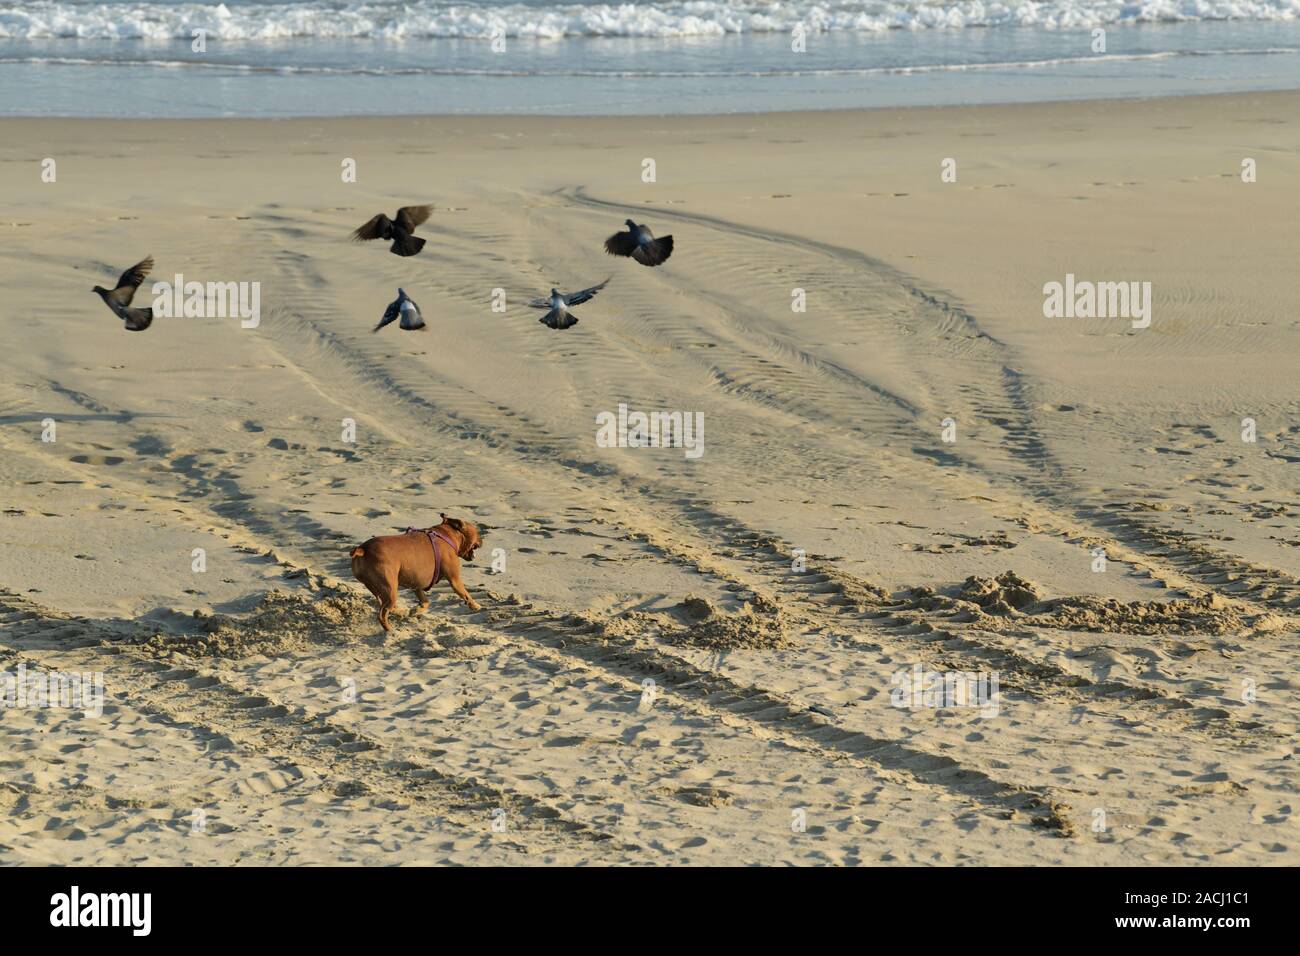 Durban, South Africa, animal, action, bold brown pet dog running on beach, chasing pigeons, coast, activity, play Stock Photo